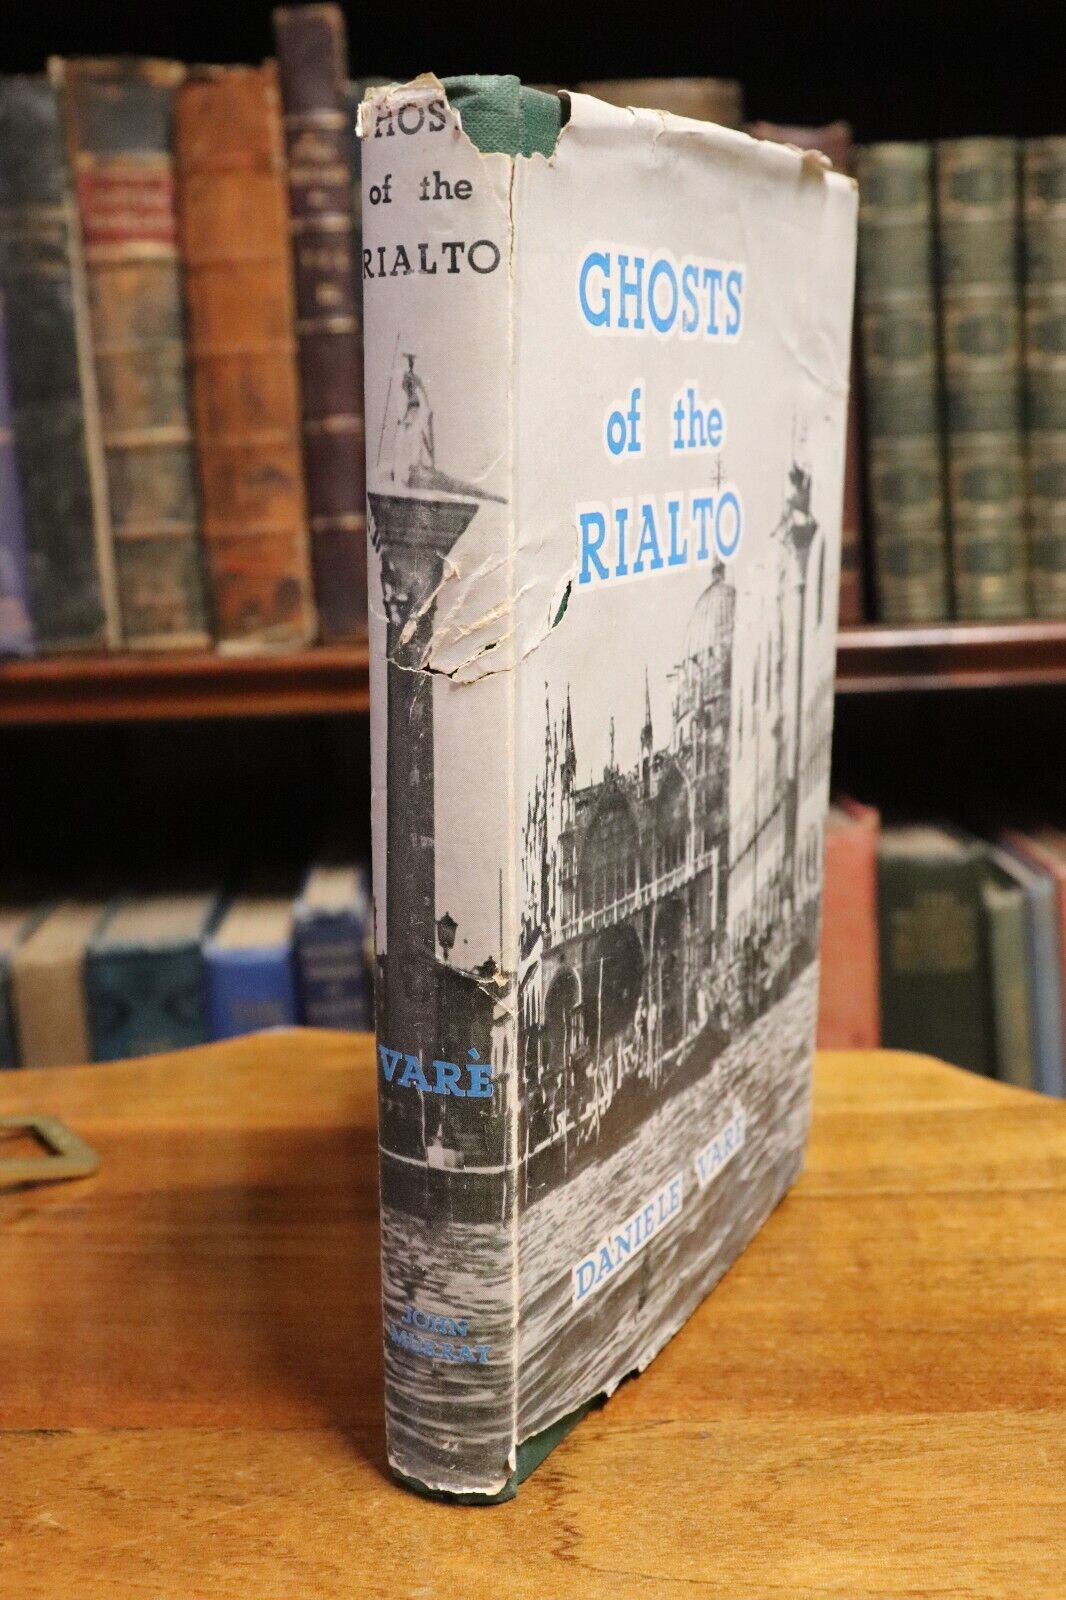 Ghosts Of The Rialto by Daniele Vare' - 1956 - 1st Ed. European History Book